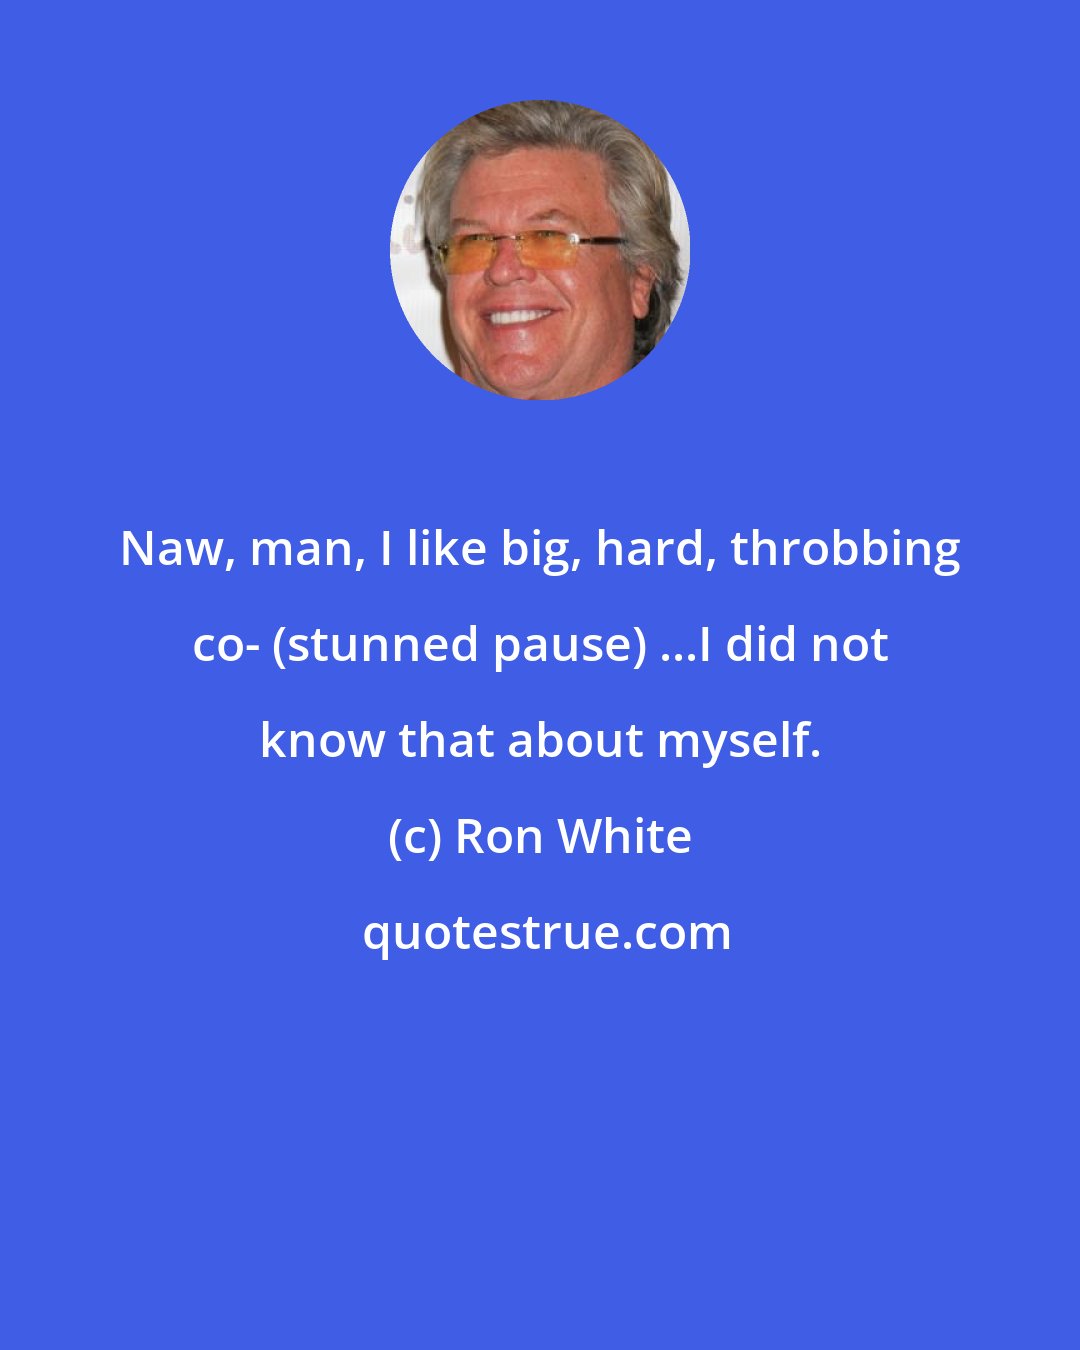 Ron White: Naw, man, I like big, hard, throbbing co- (stunned pause) ...I did not know that about myself.